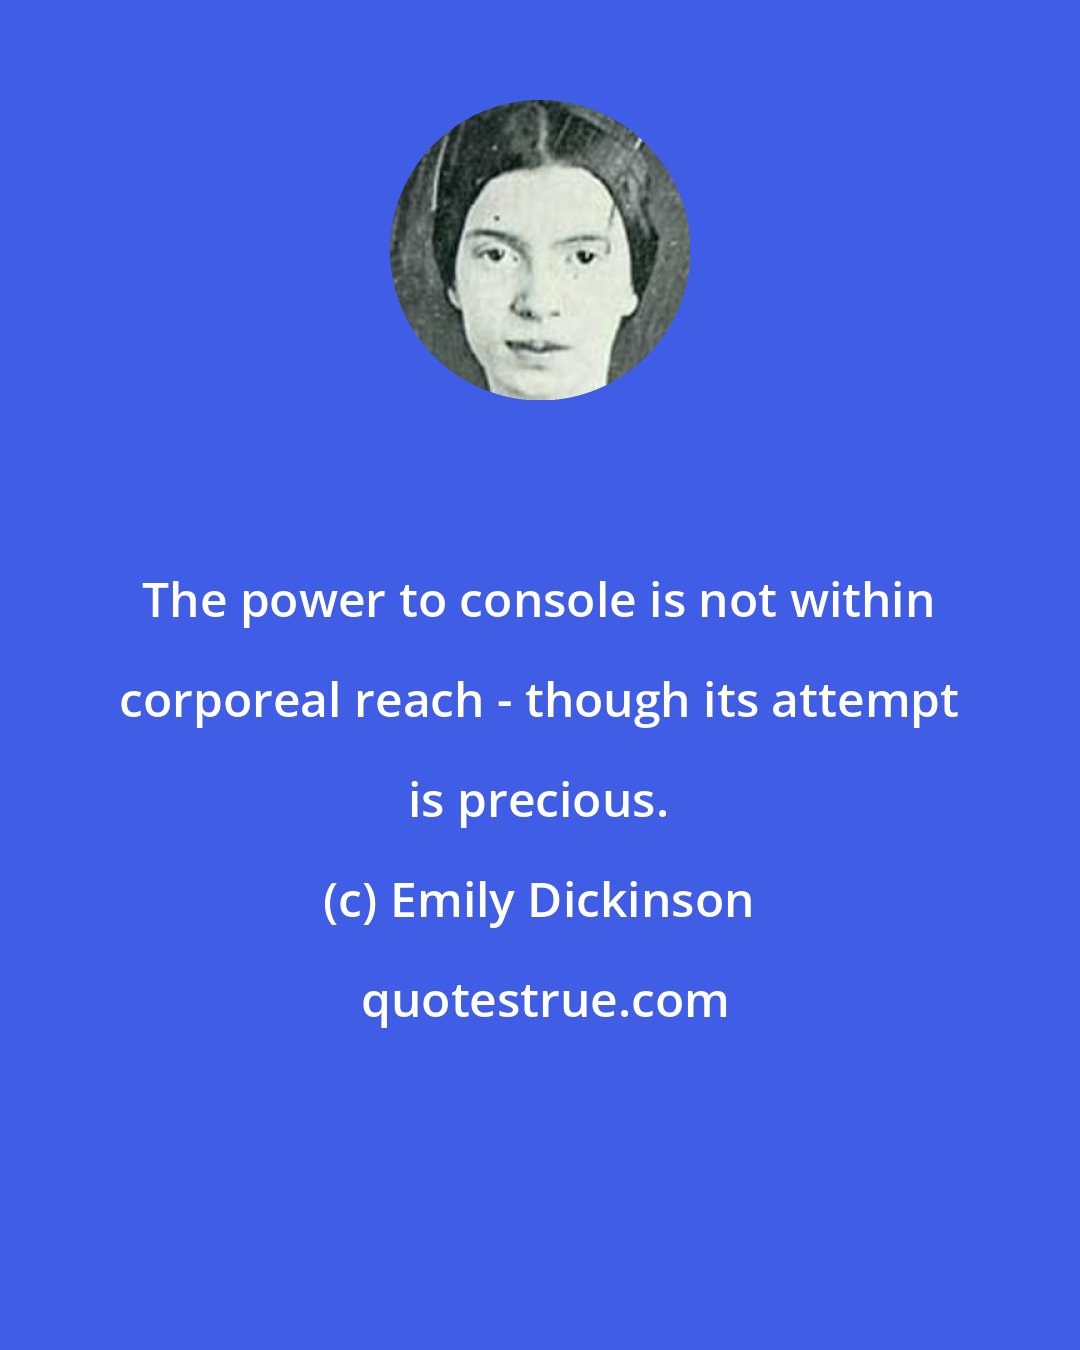 Emily Dickinson: The power to console is not within corporeal reach - though its attempt is precious.